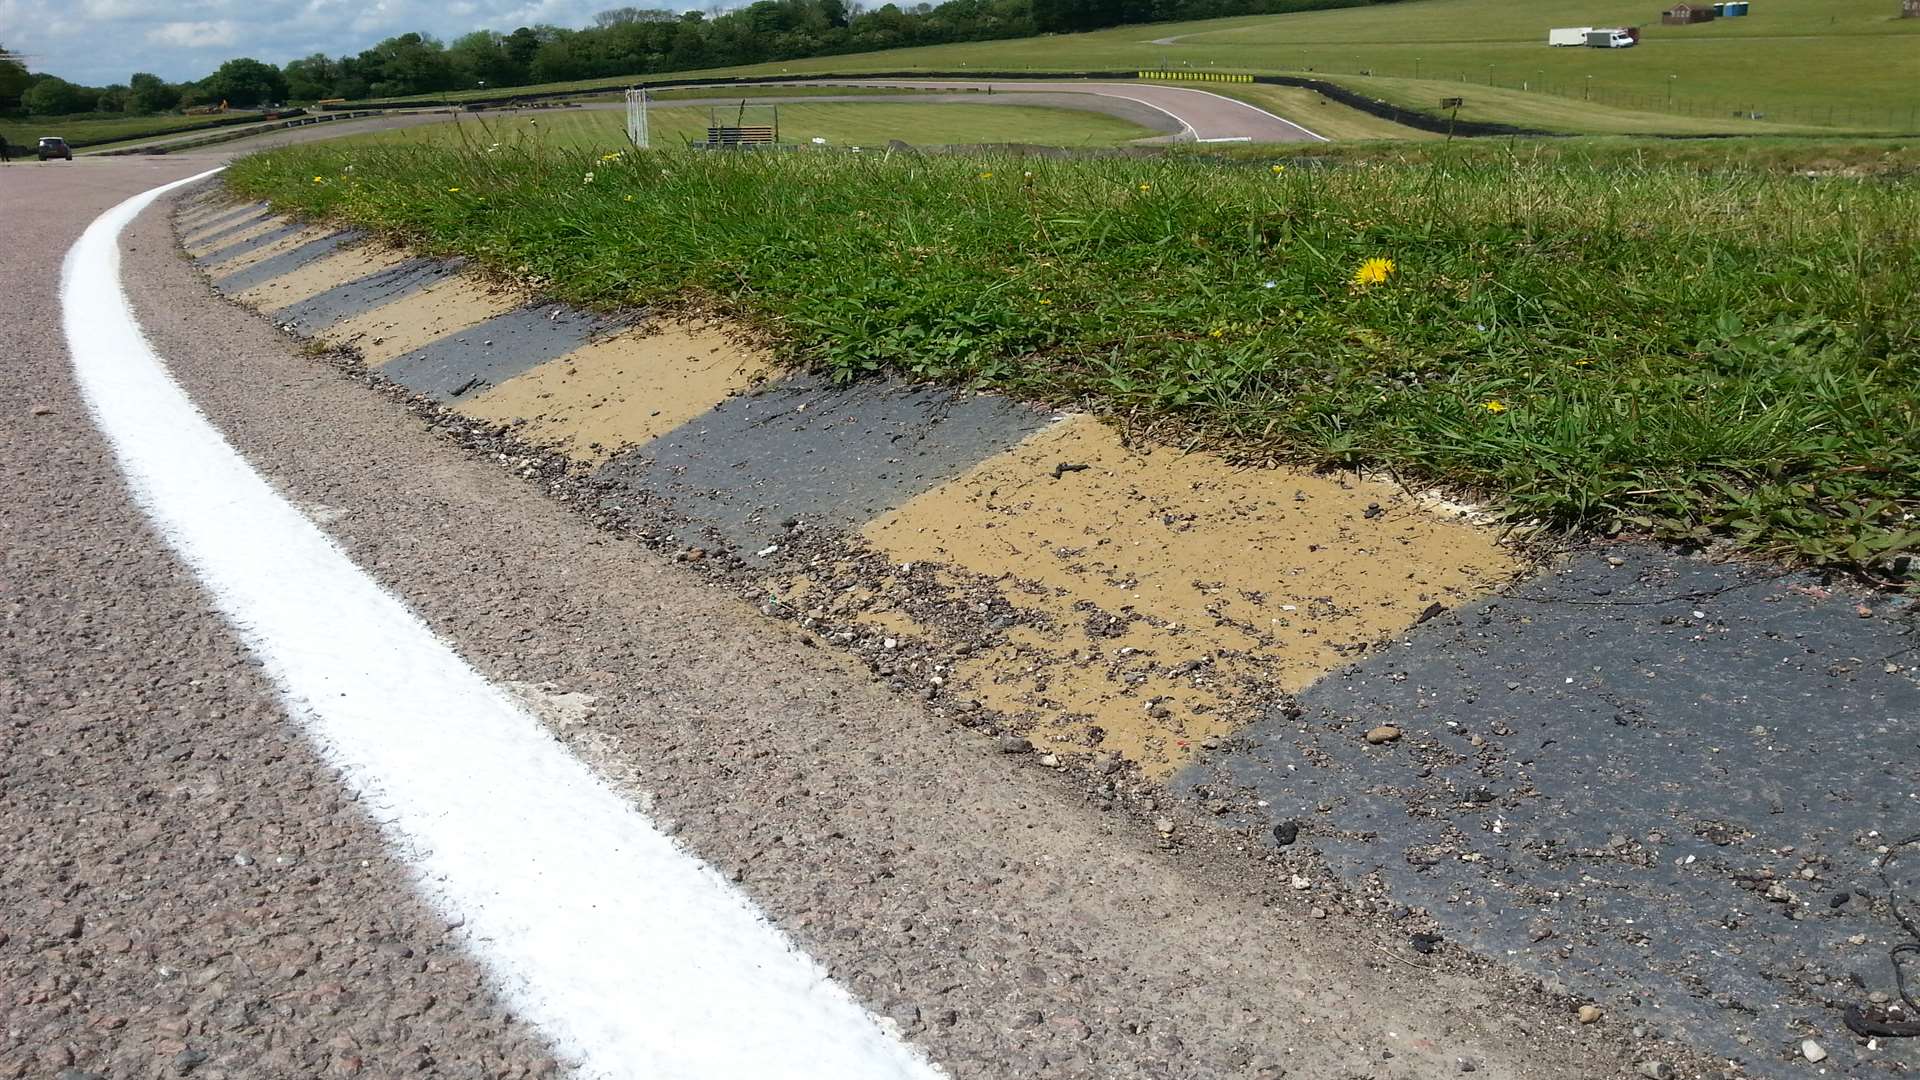 Lydden is looking at its best ahead of the weekend's racing